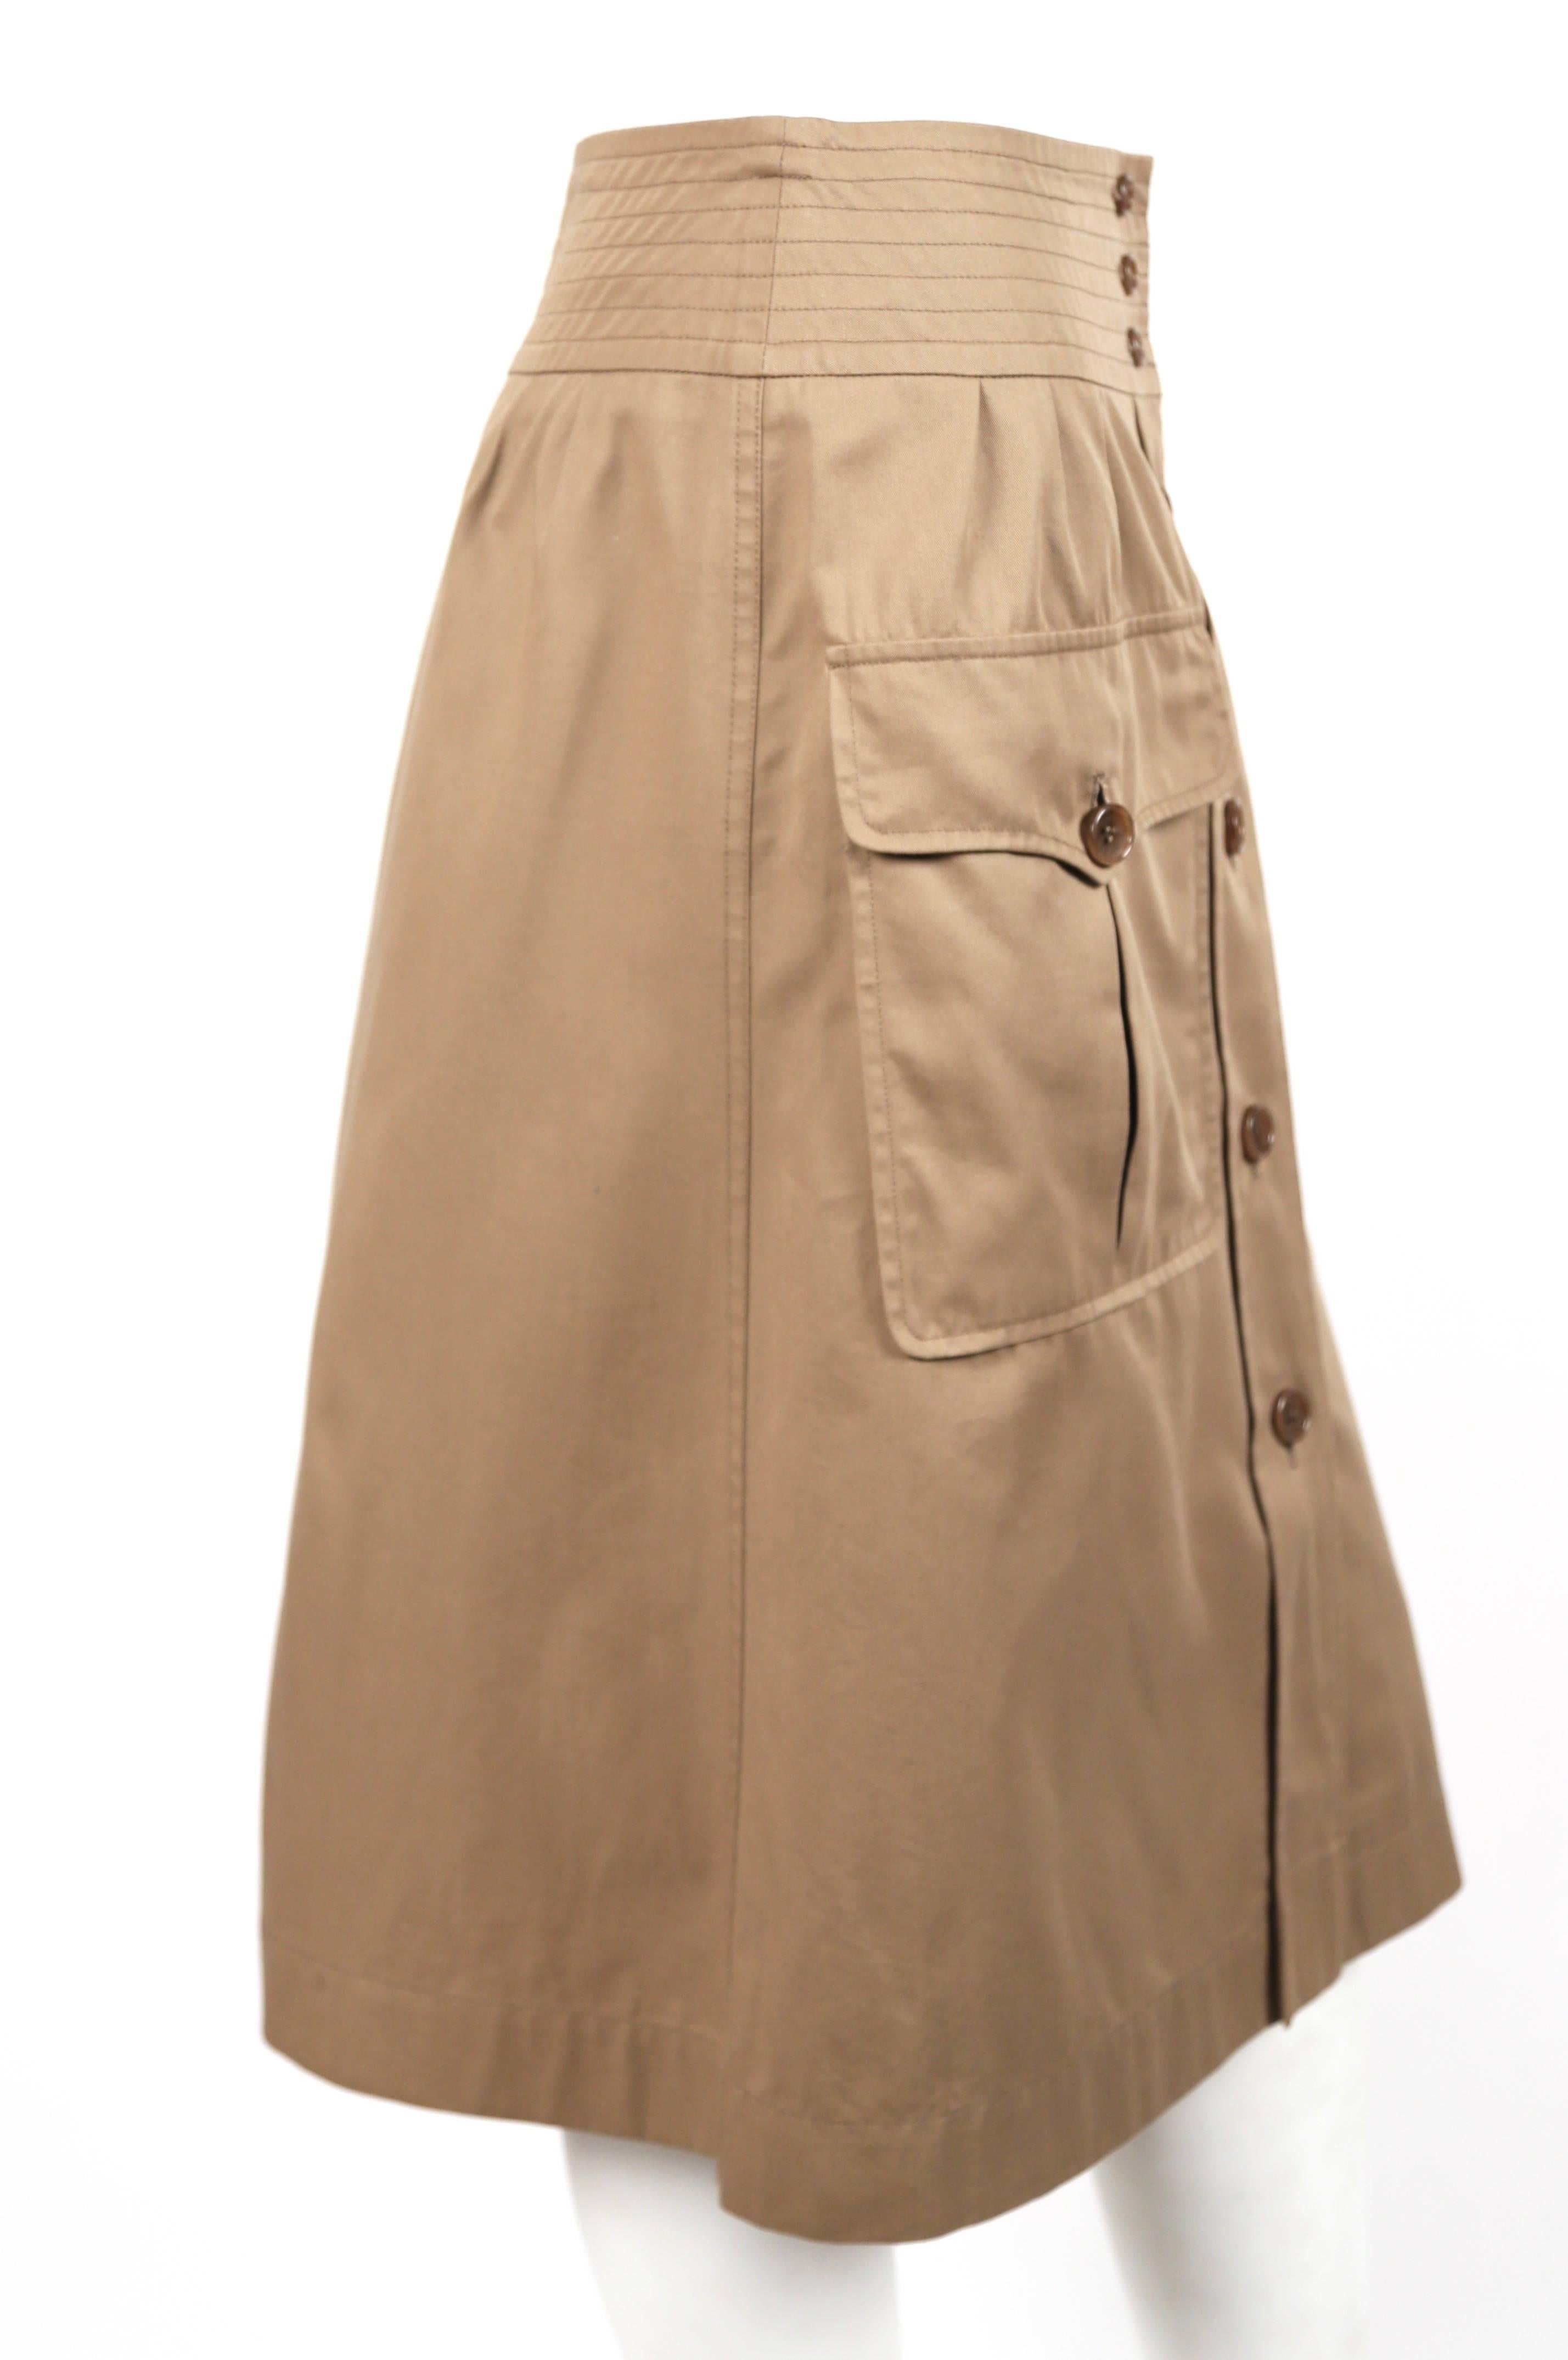 Khaki cotton safari skirt with A-line shape designed by Yves Saint Laurent dating to the 1970's. French size 40. Approximate measurements: waist 26